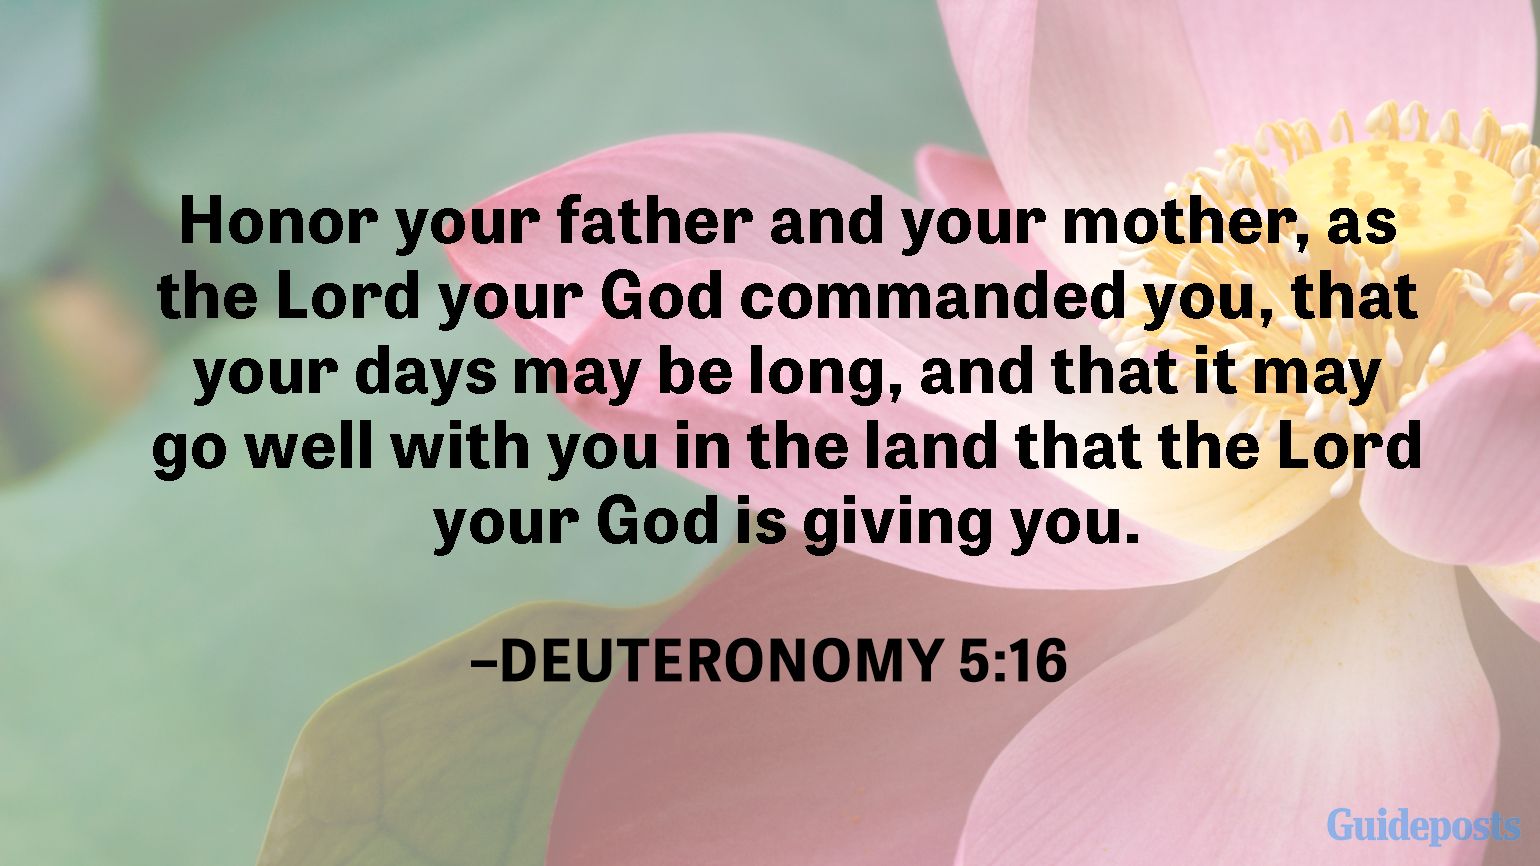 Honor your father and your mother, as the Lord your God commanded you, that your days may be long, and that it may go well with you in the land that the Lord your God is giving you.  —Deuteronomy 5:16